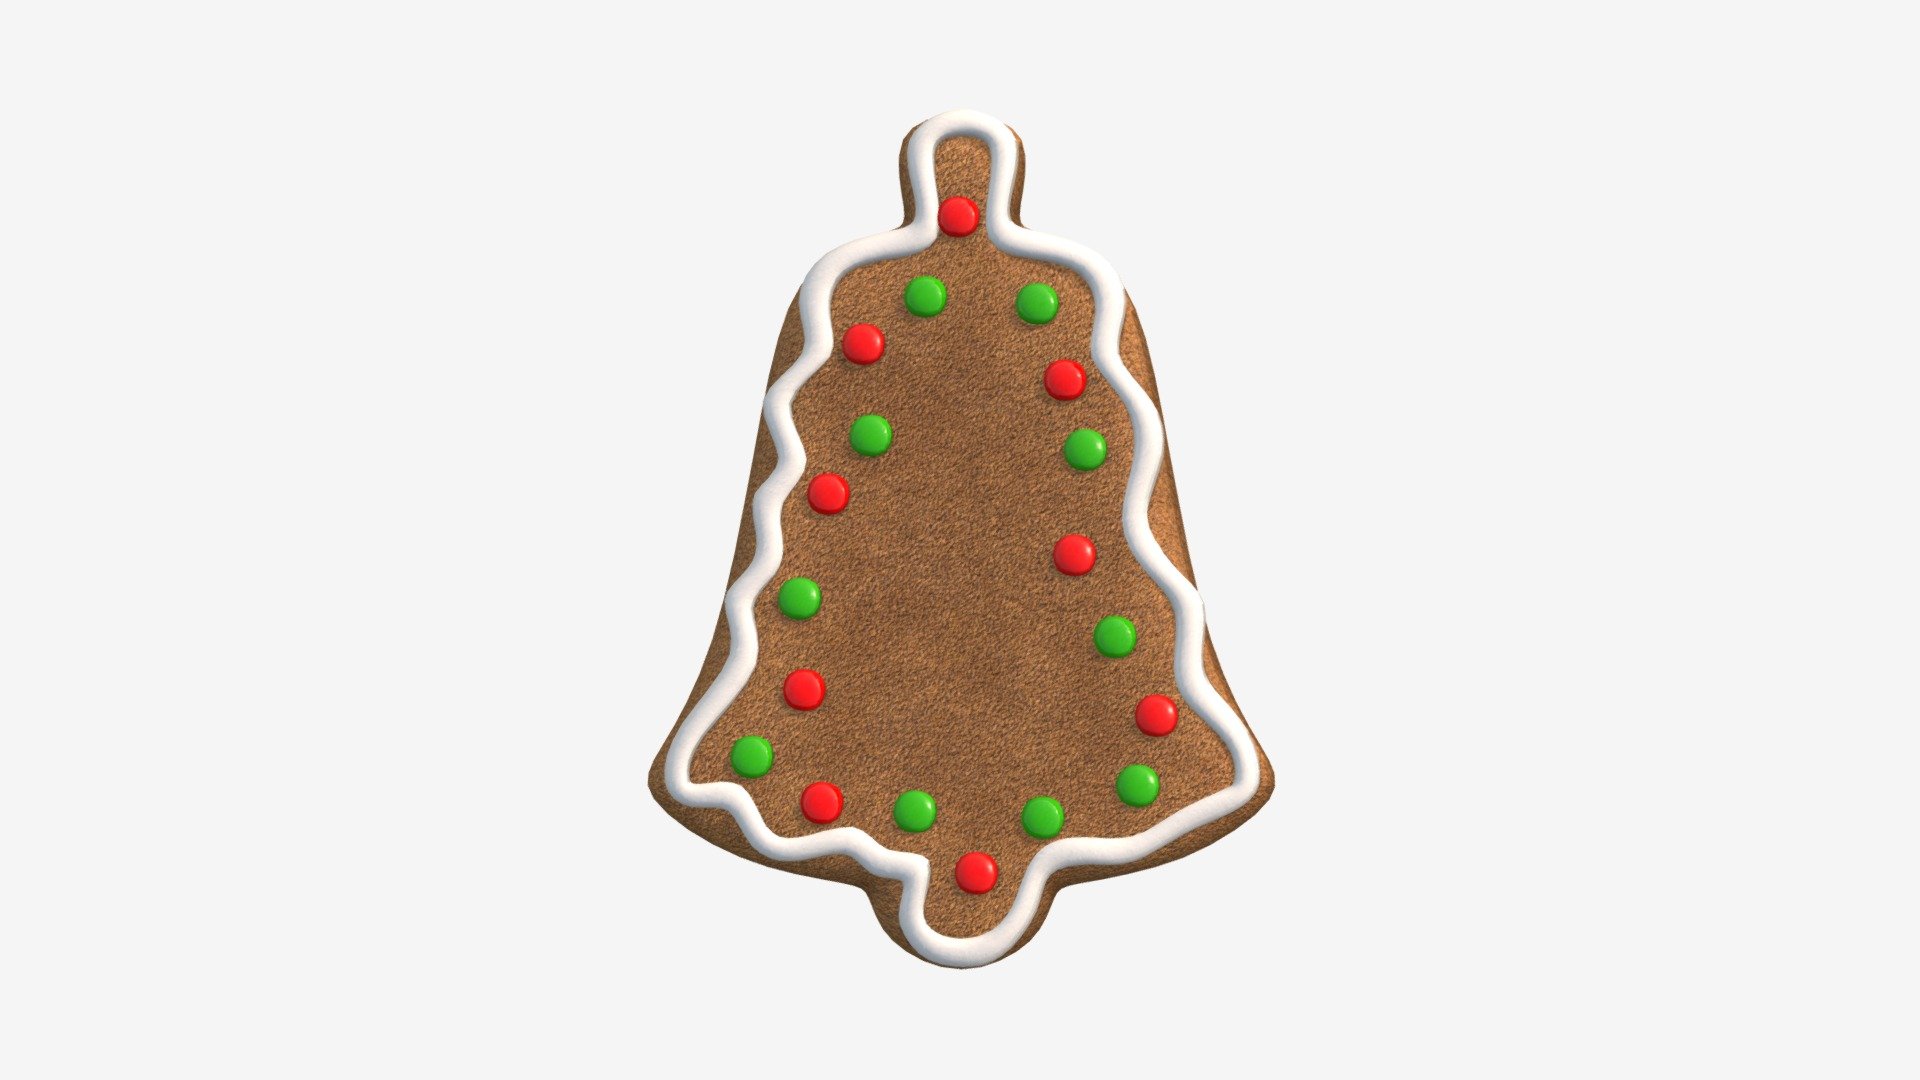 Created in 3ds max 2016
Saved to 3ds max 2013
Units: Centimeters
Dimension: 4.68 x 6.39 x 0.8
Polys: 6744
XForm: Yes
Box Trick: No
Model Parts: 1 - Gingerbread cookie 11 - Buy Royalty Free 3D model by HQ3DMOD (@AivisAstics) 3d model